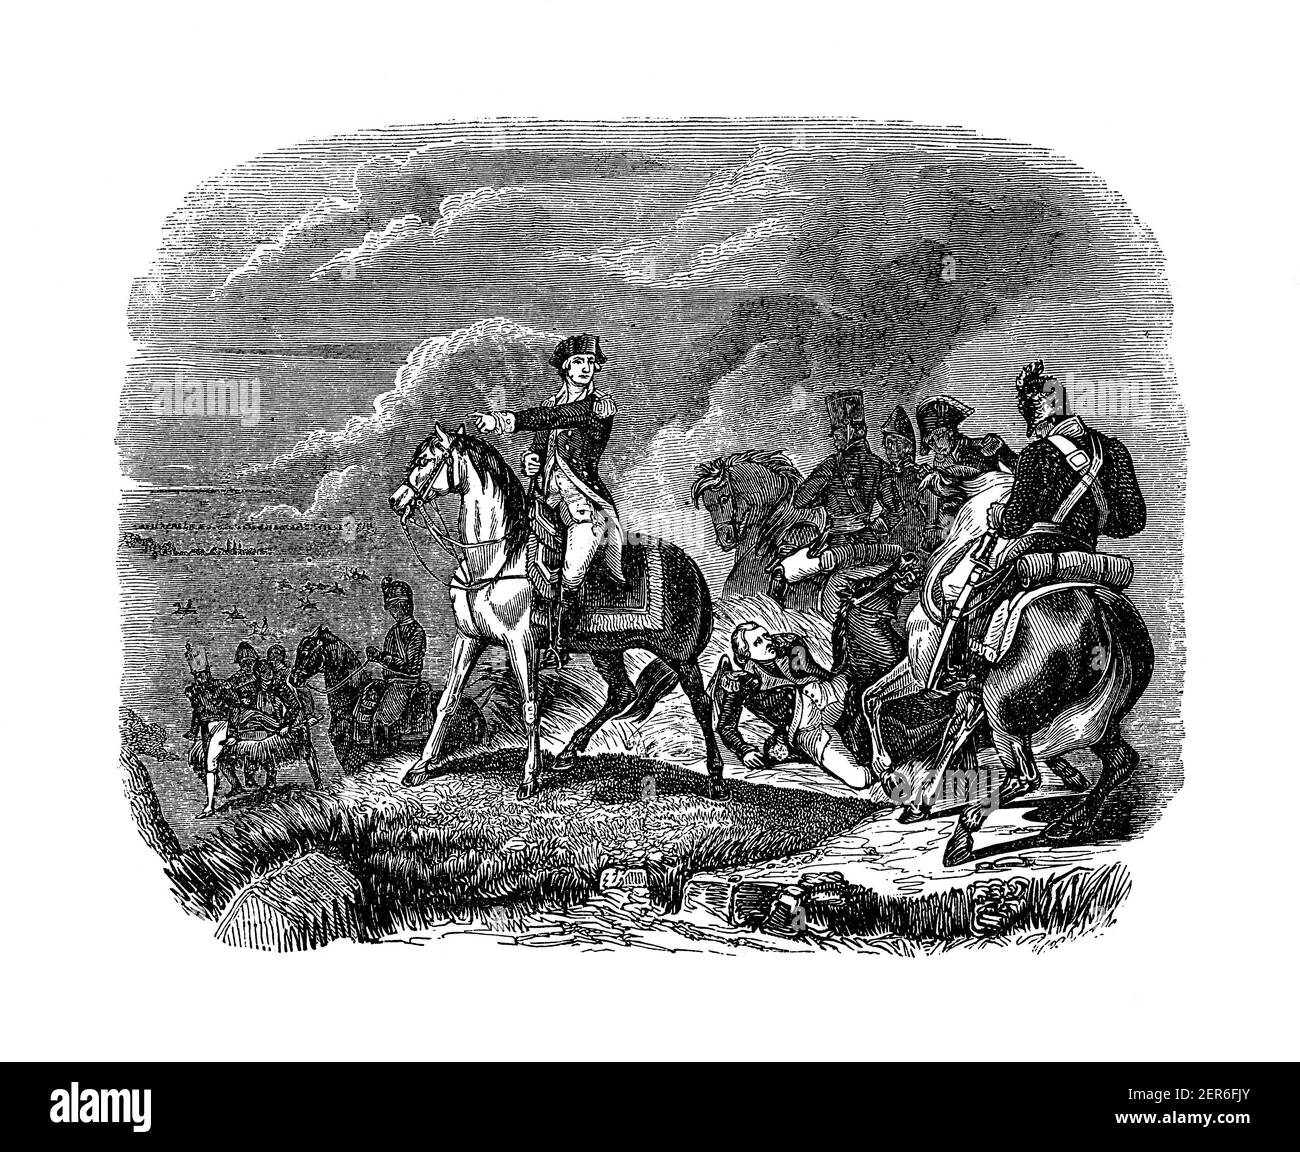 Antique engraving of the battle of Princeton fought on 3 January 1777, in which the revolutionary forces led by General George Washington defeated the Stock Photo